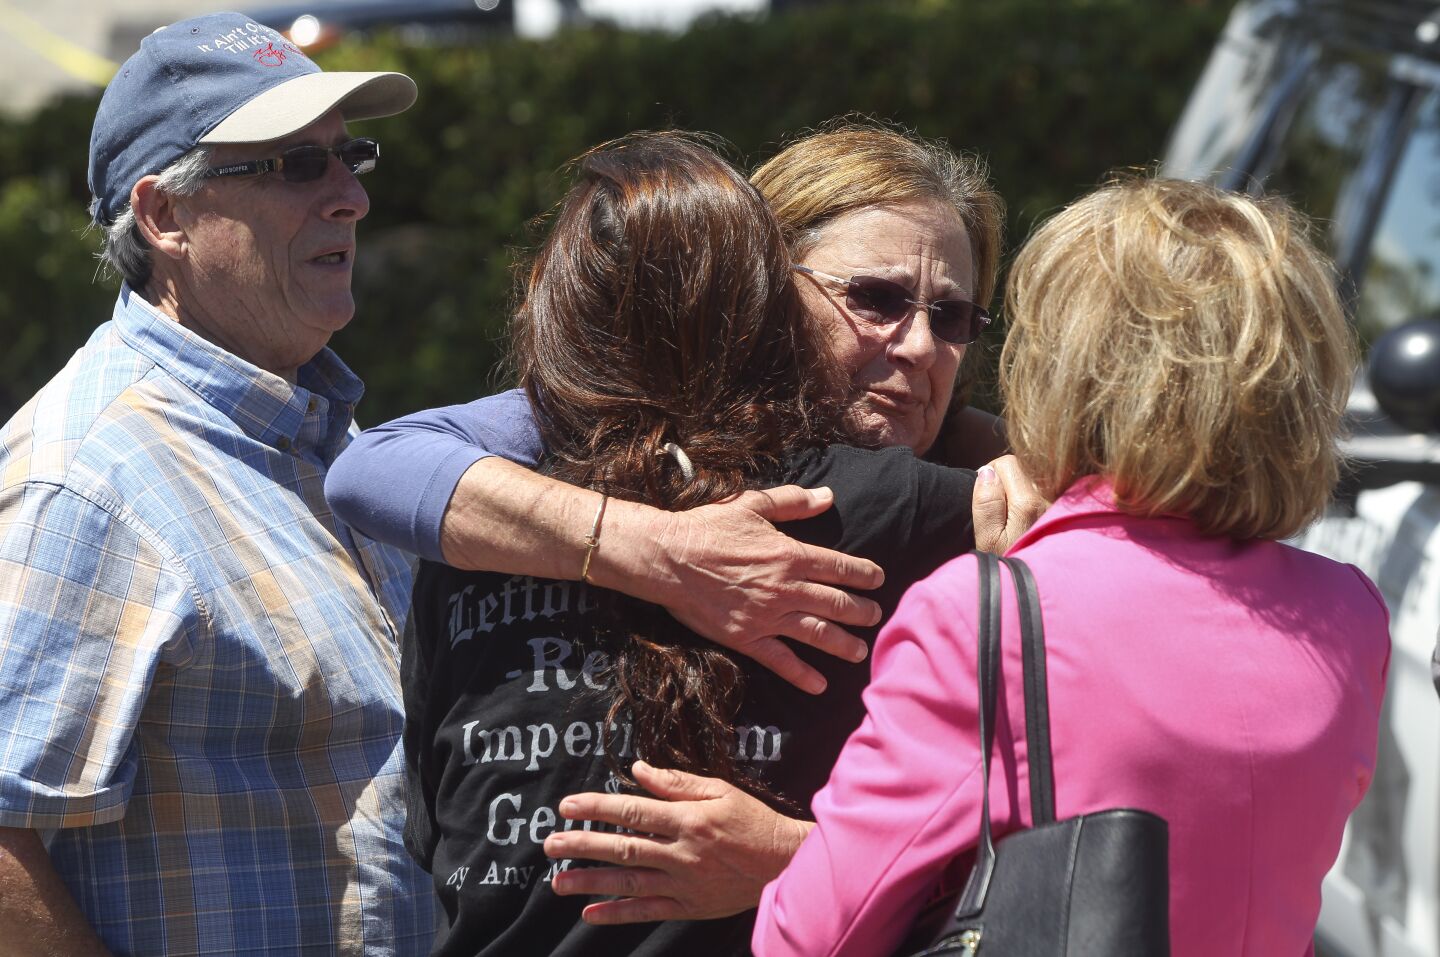 Members of the Chabad synagogue hug as they gather near the Altman Family Chabad Community Center where a man with a gun shot multiple people inside the community center, killing one, in Poway on Saturday, April 27, 2019 in Poway, California.